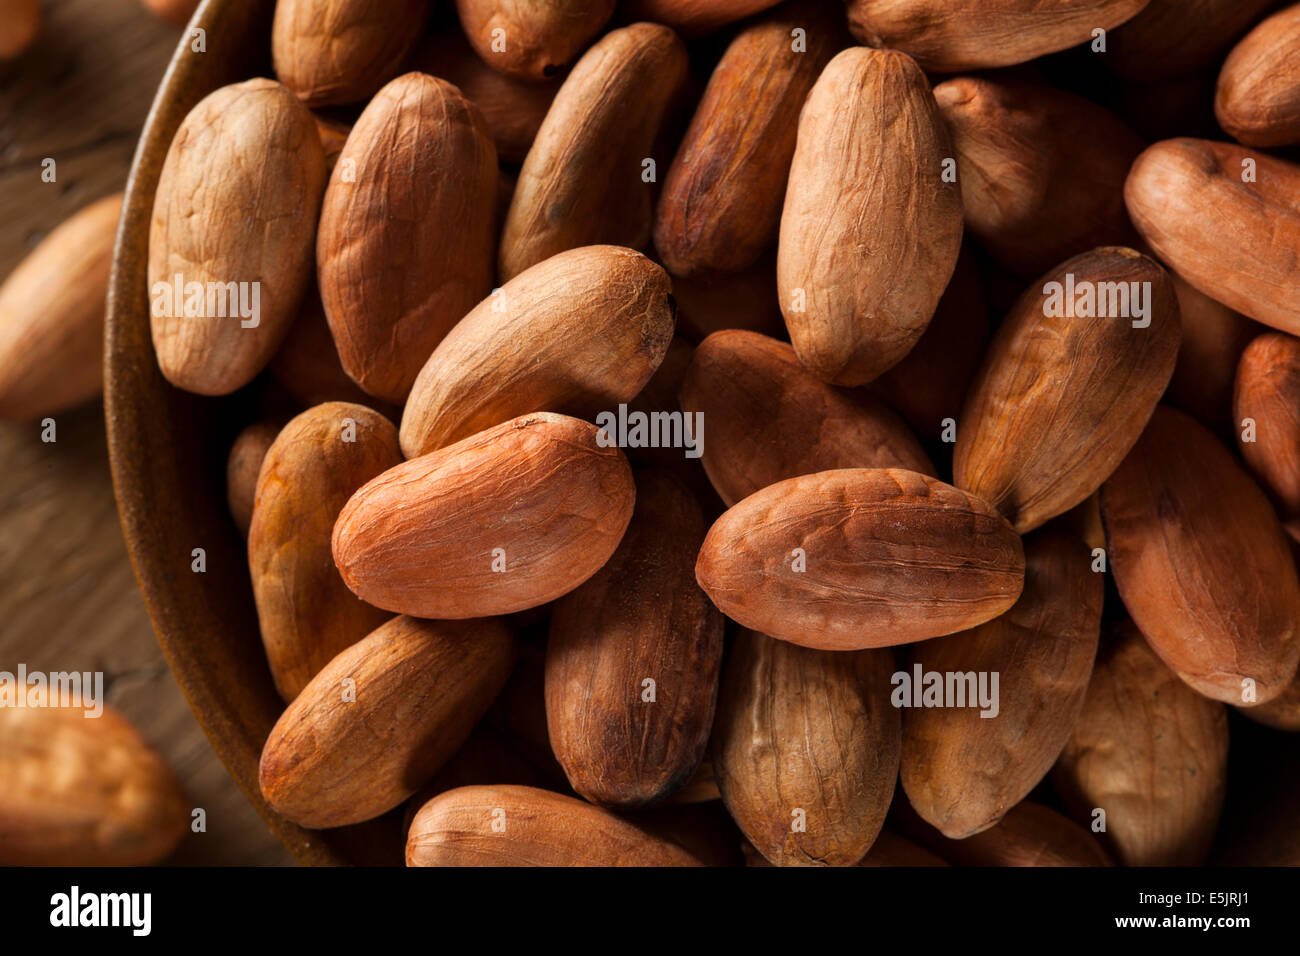 Raw Organic Cocoa Beans in a Bowl Stock Photo